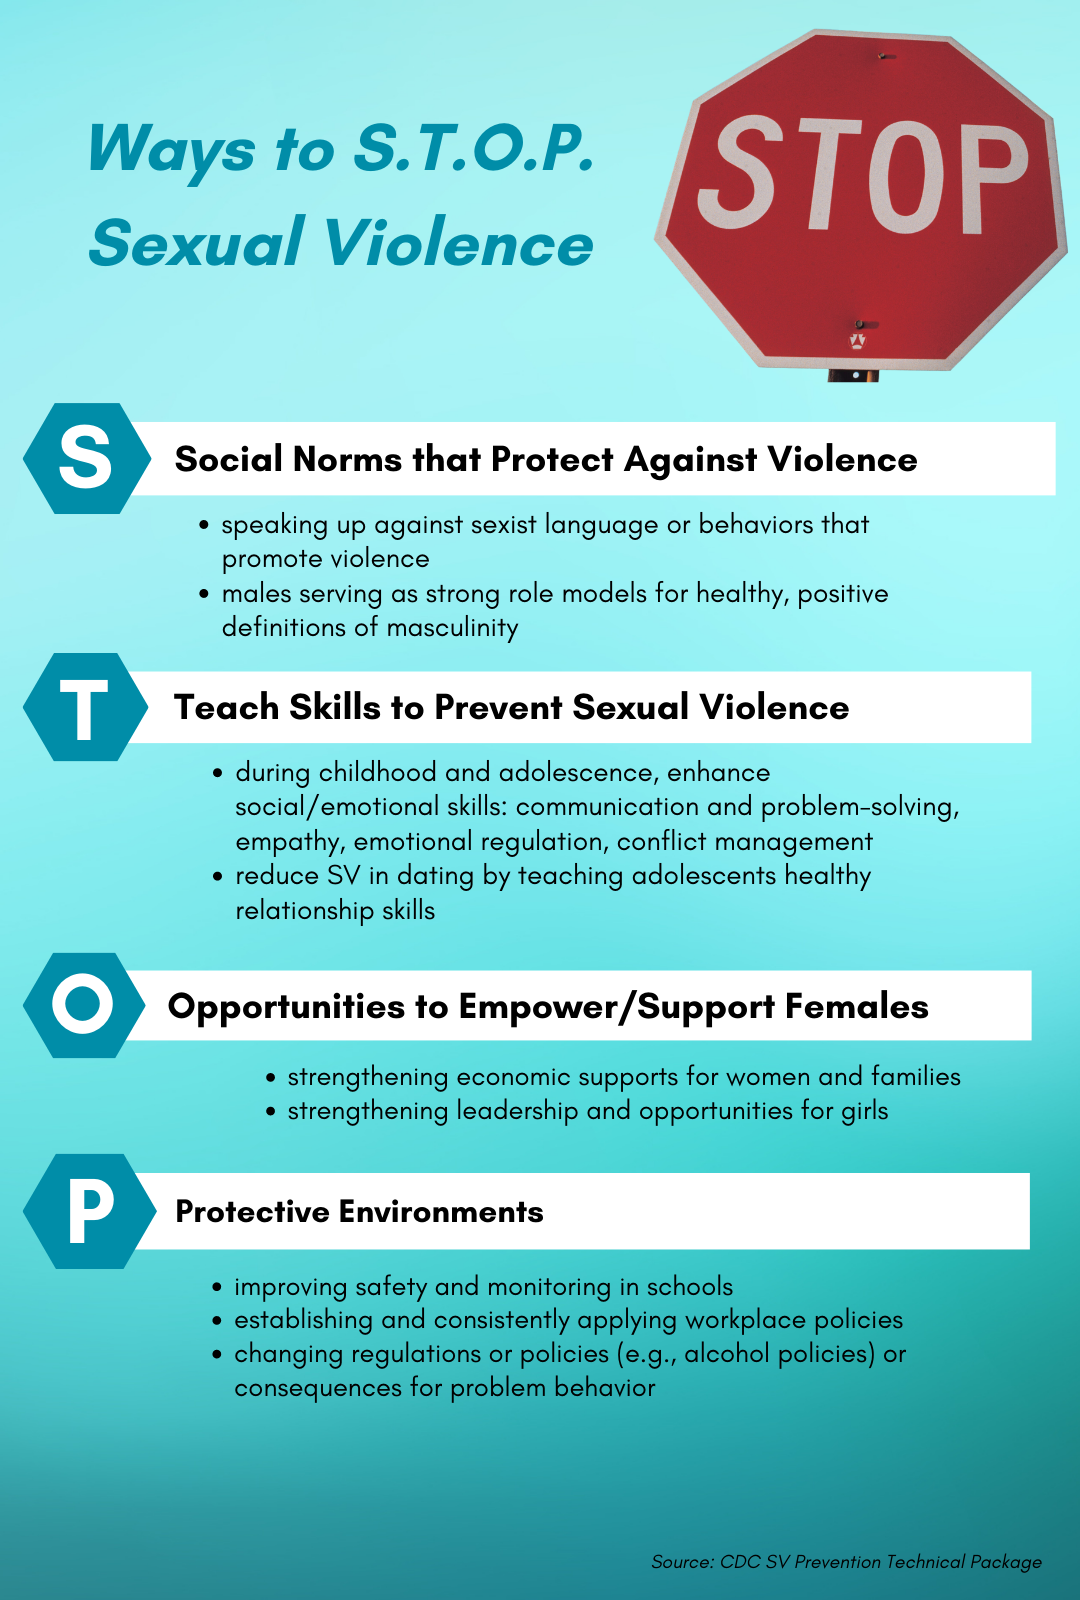 ways to help prevent sexual violence from CDC